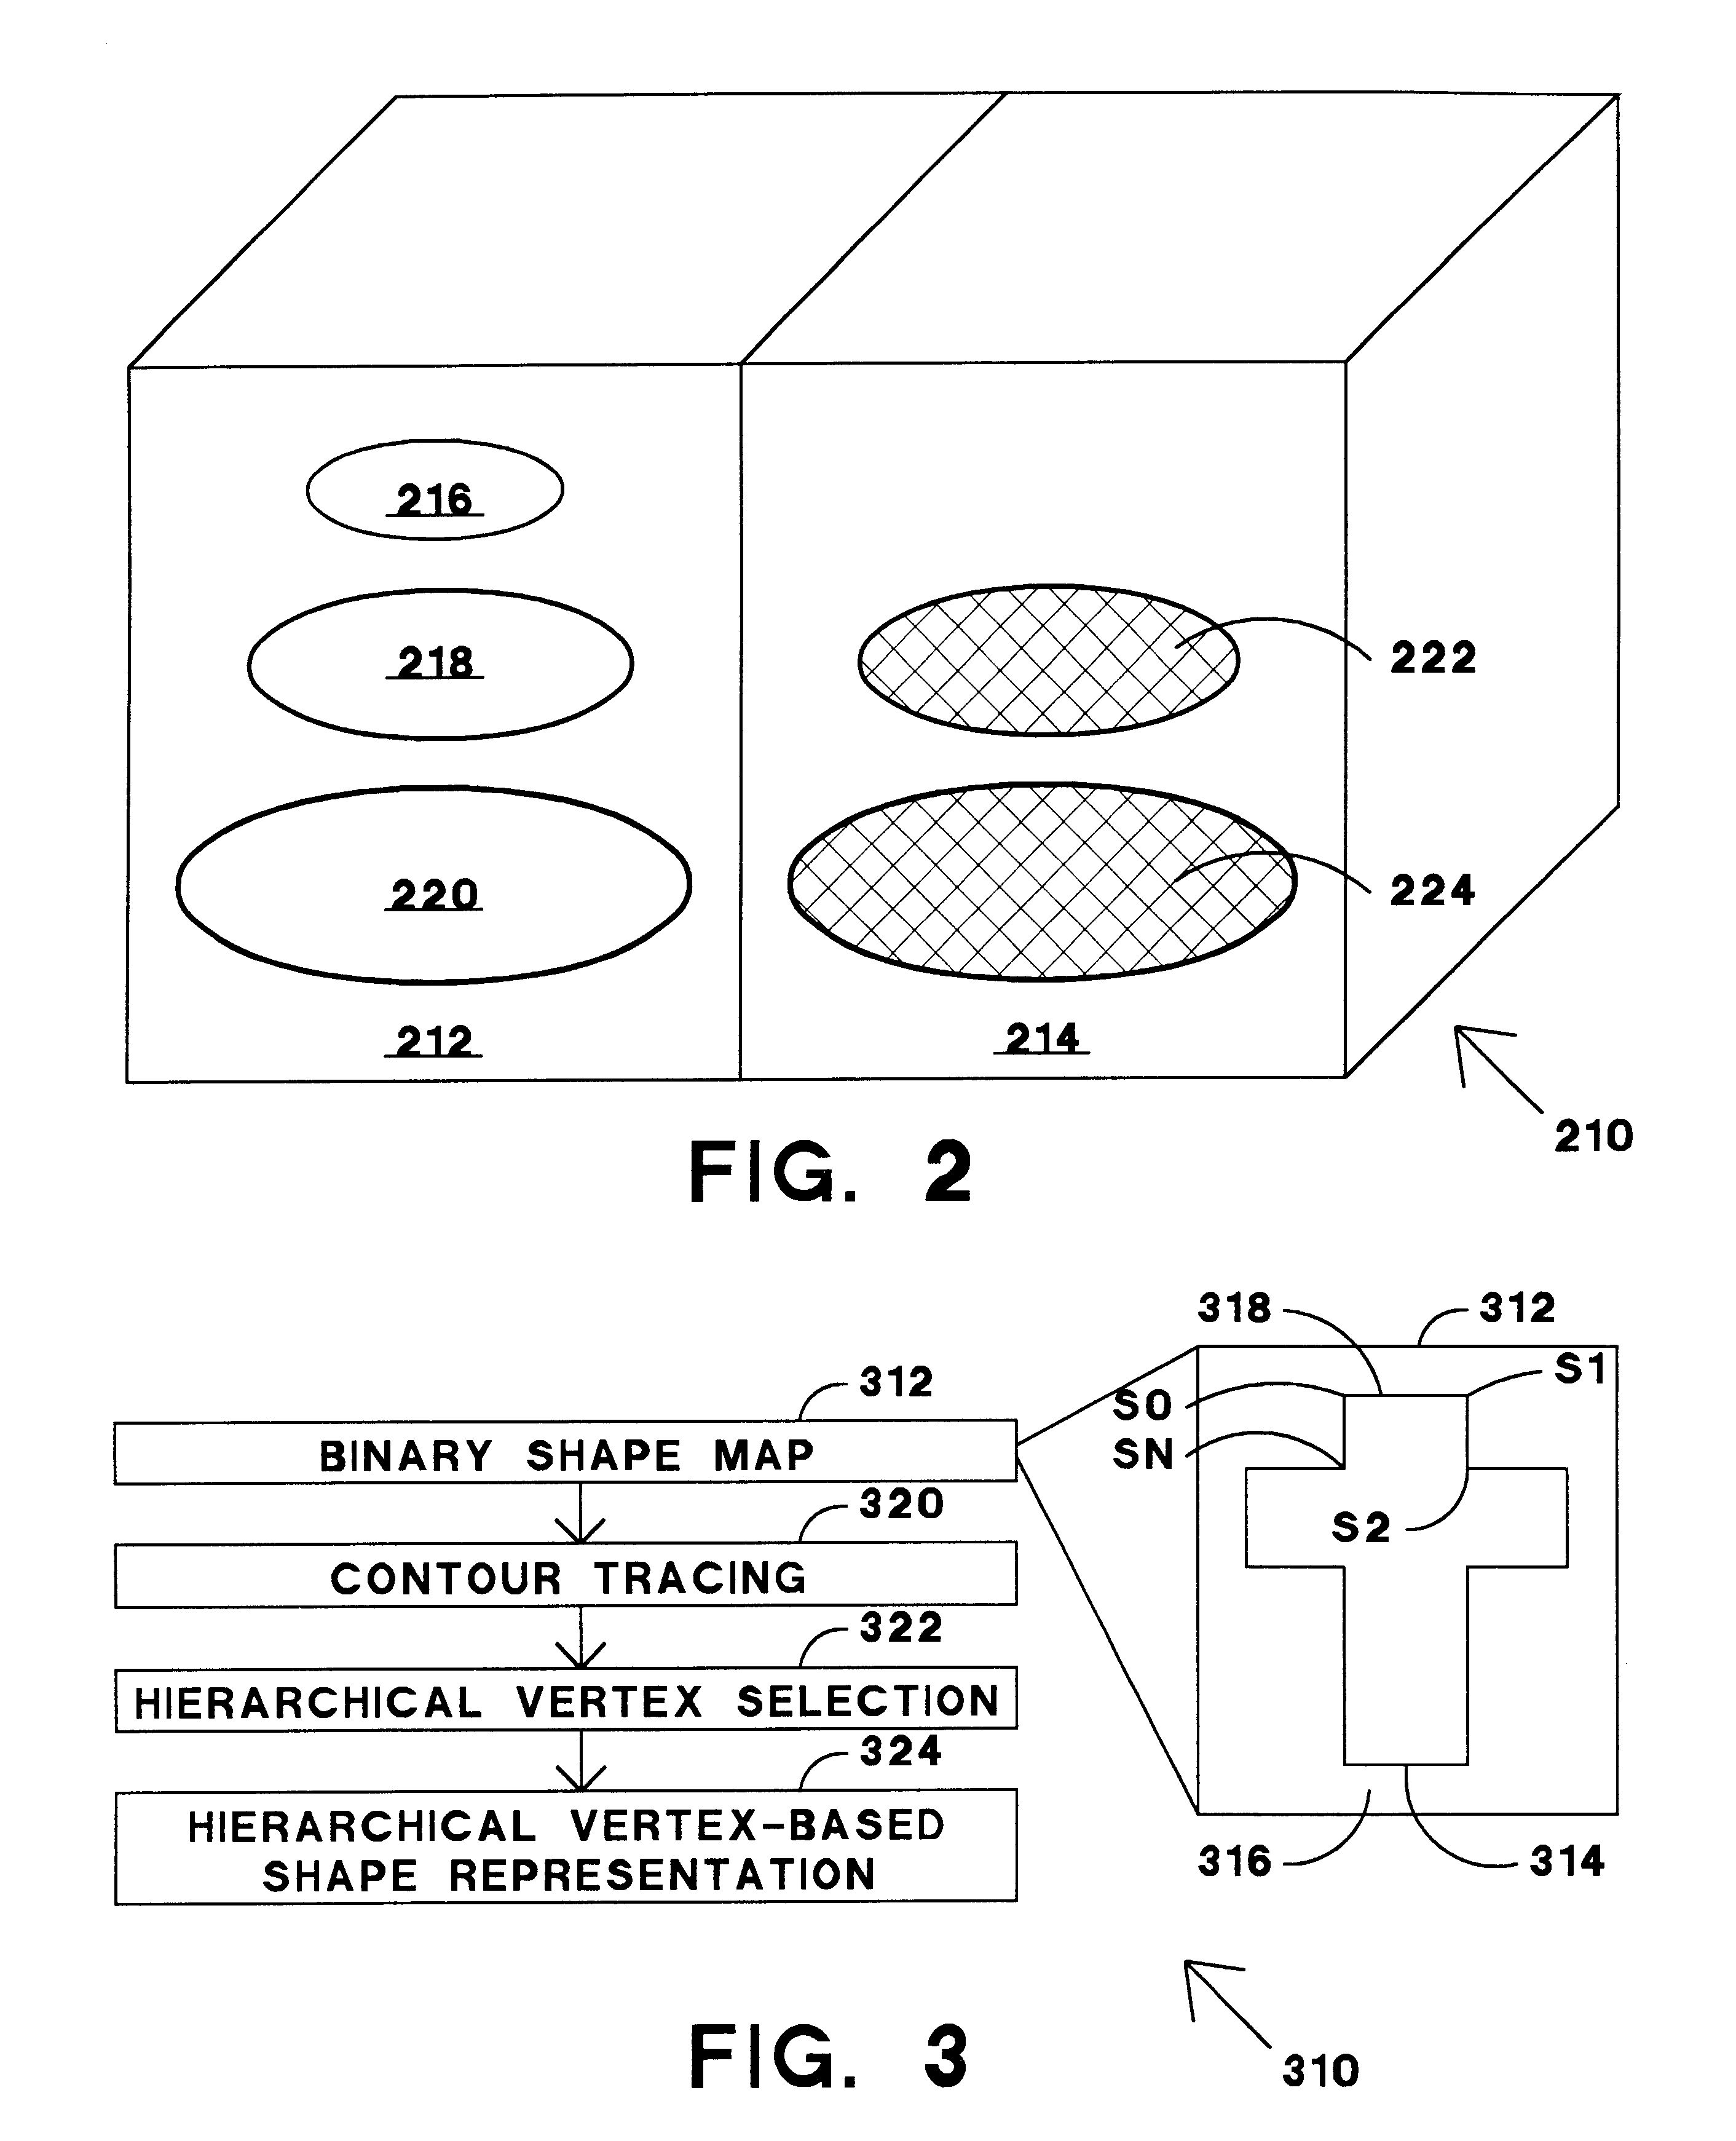 Method for fast return of abstracted images from a digital images database